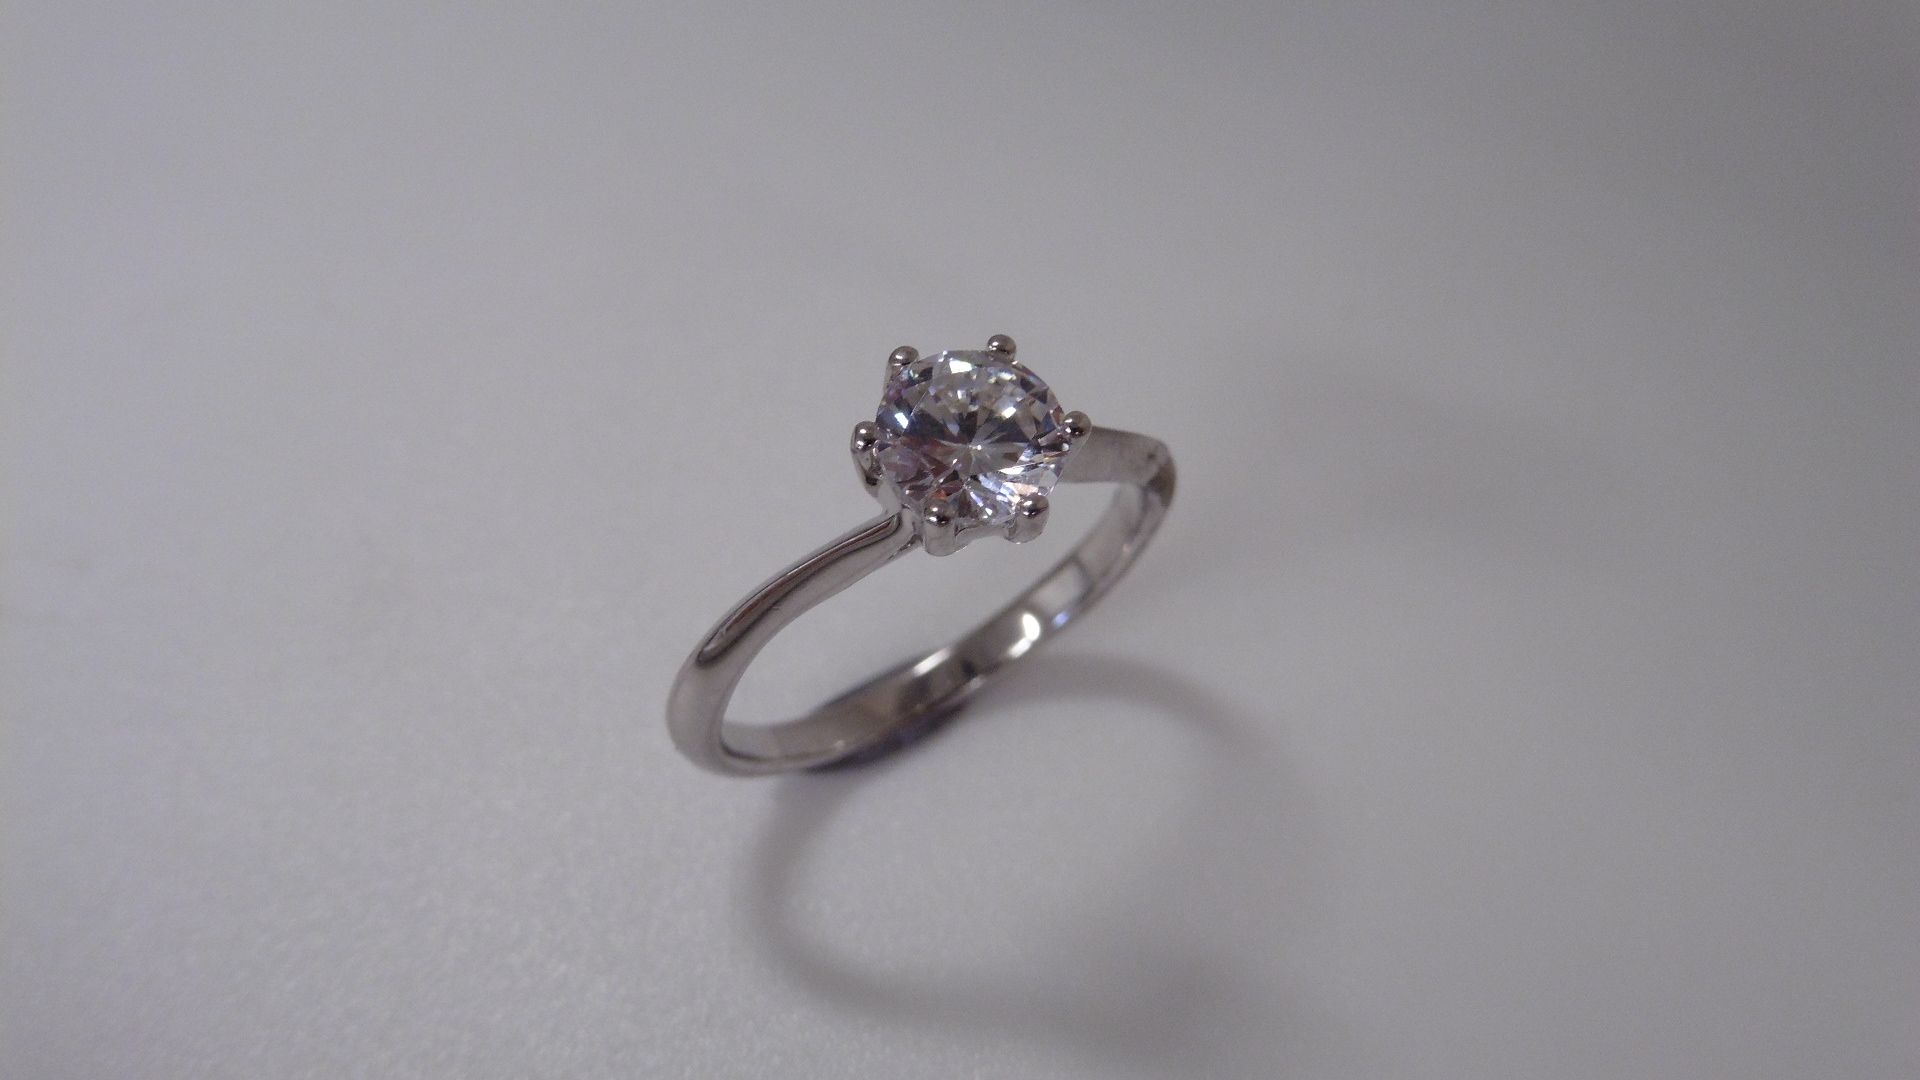 1.02ct diamond solitaire ring with an enhanced brilliant cut diamond. I colour and I1-2 clarity. Set